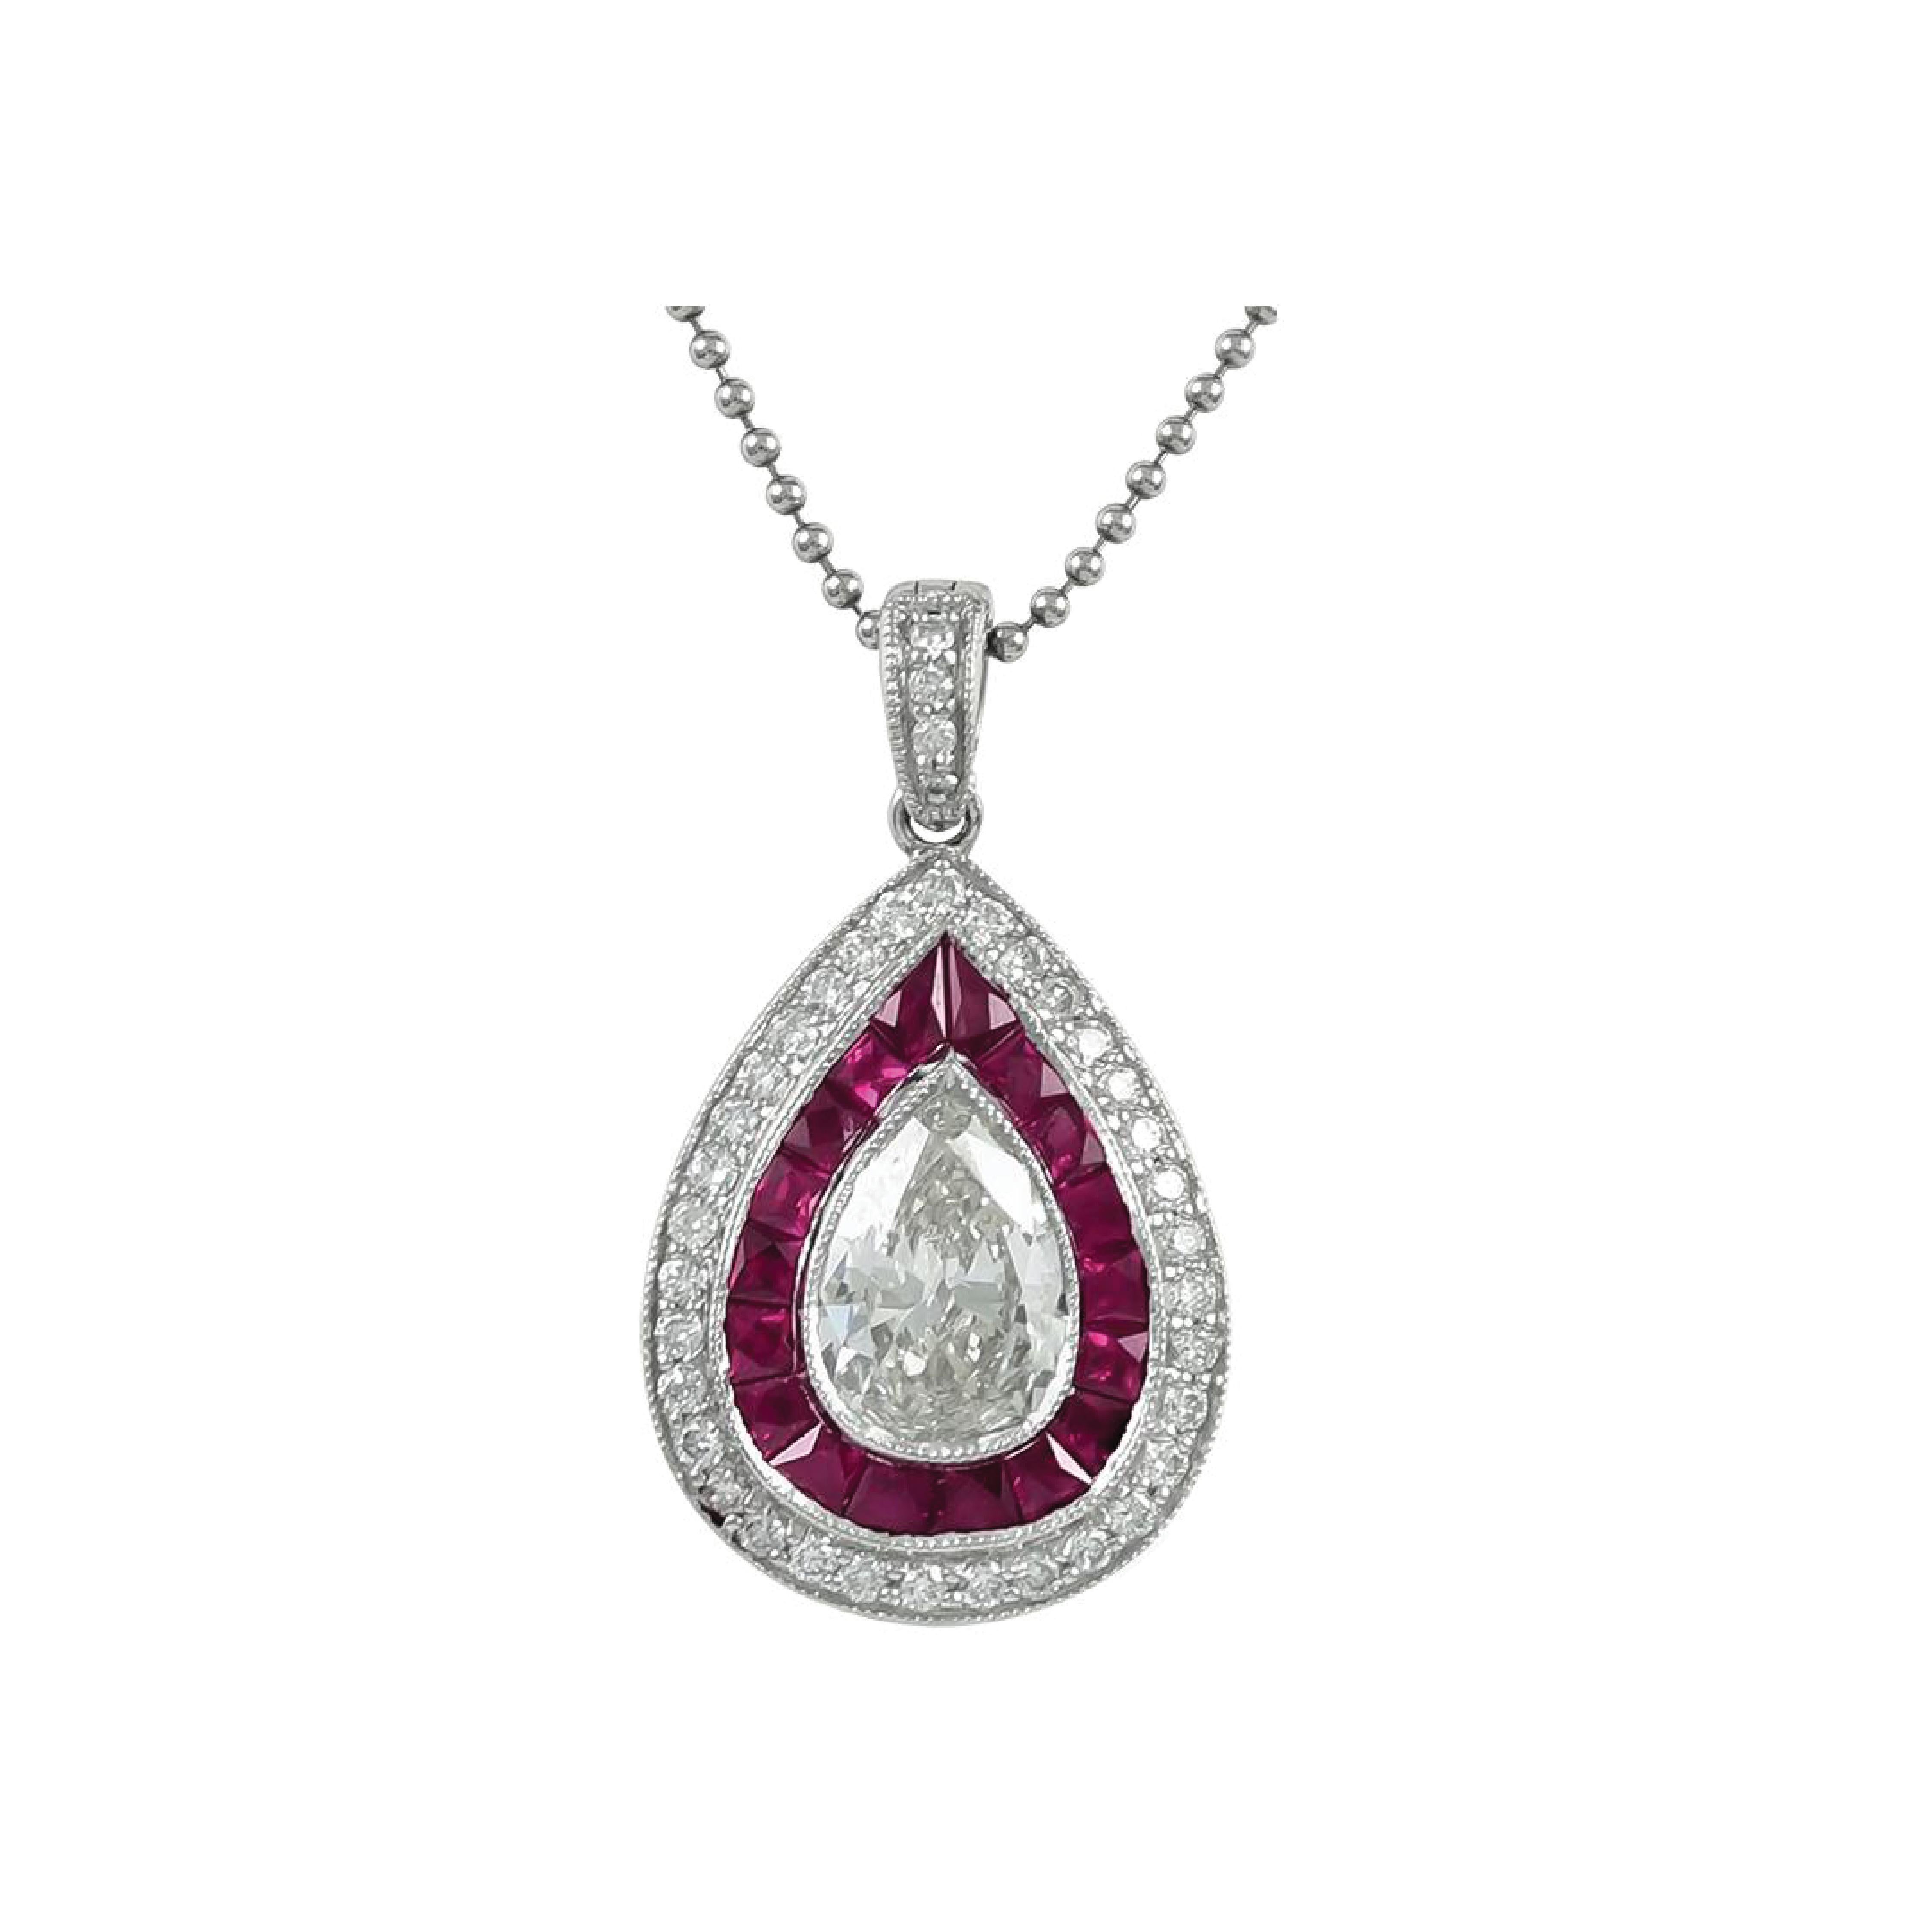 Platinum set pendant and chain with rubies weighing 0.73 carats and center pear shape diamond weighing 1.01 carats and smaller diamonds with a total weight of 0.29 carats.

Sophia D by Joseph Dardashti LTD has been known worldwide for 35 years and